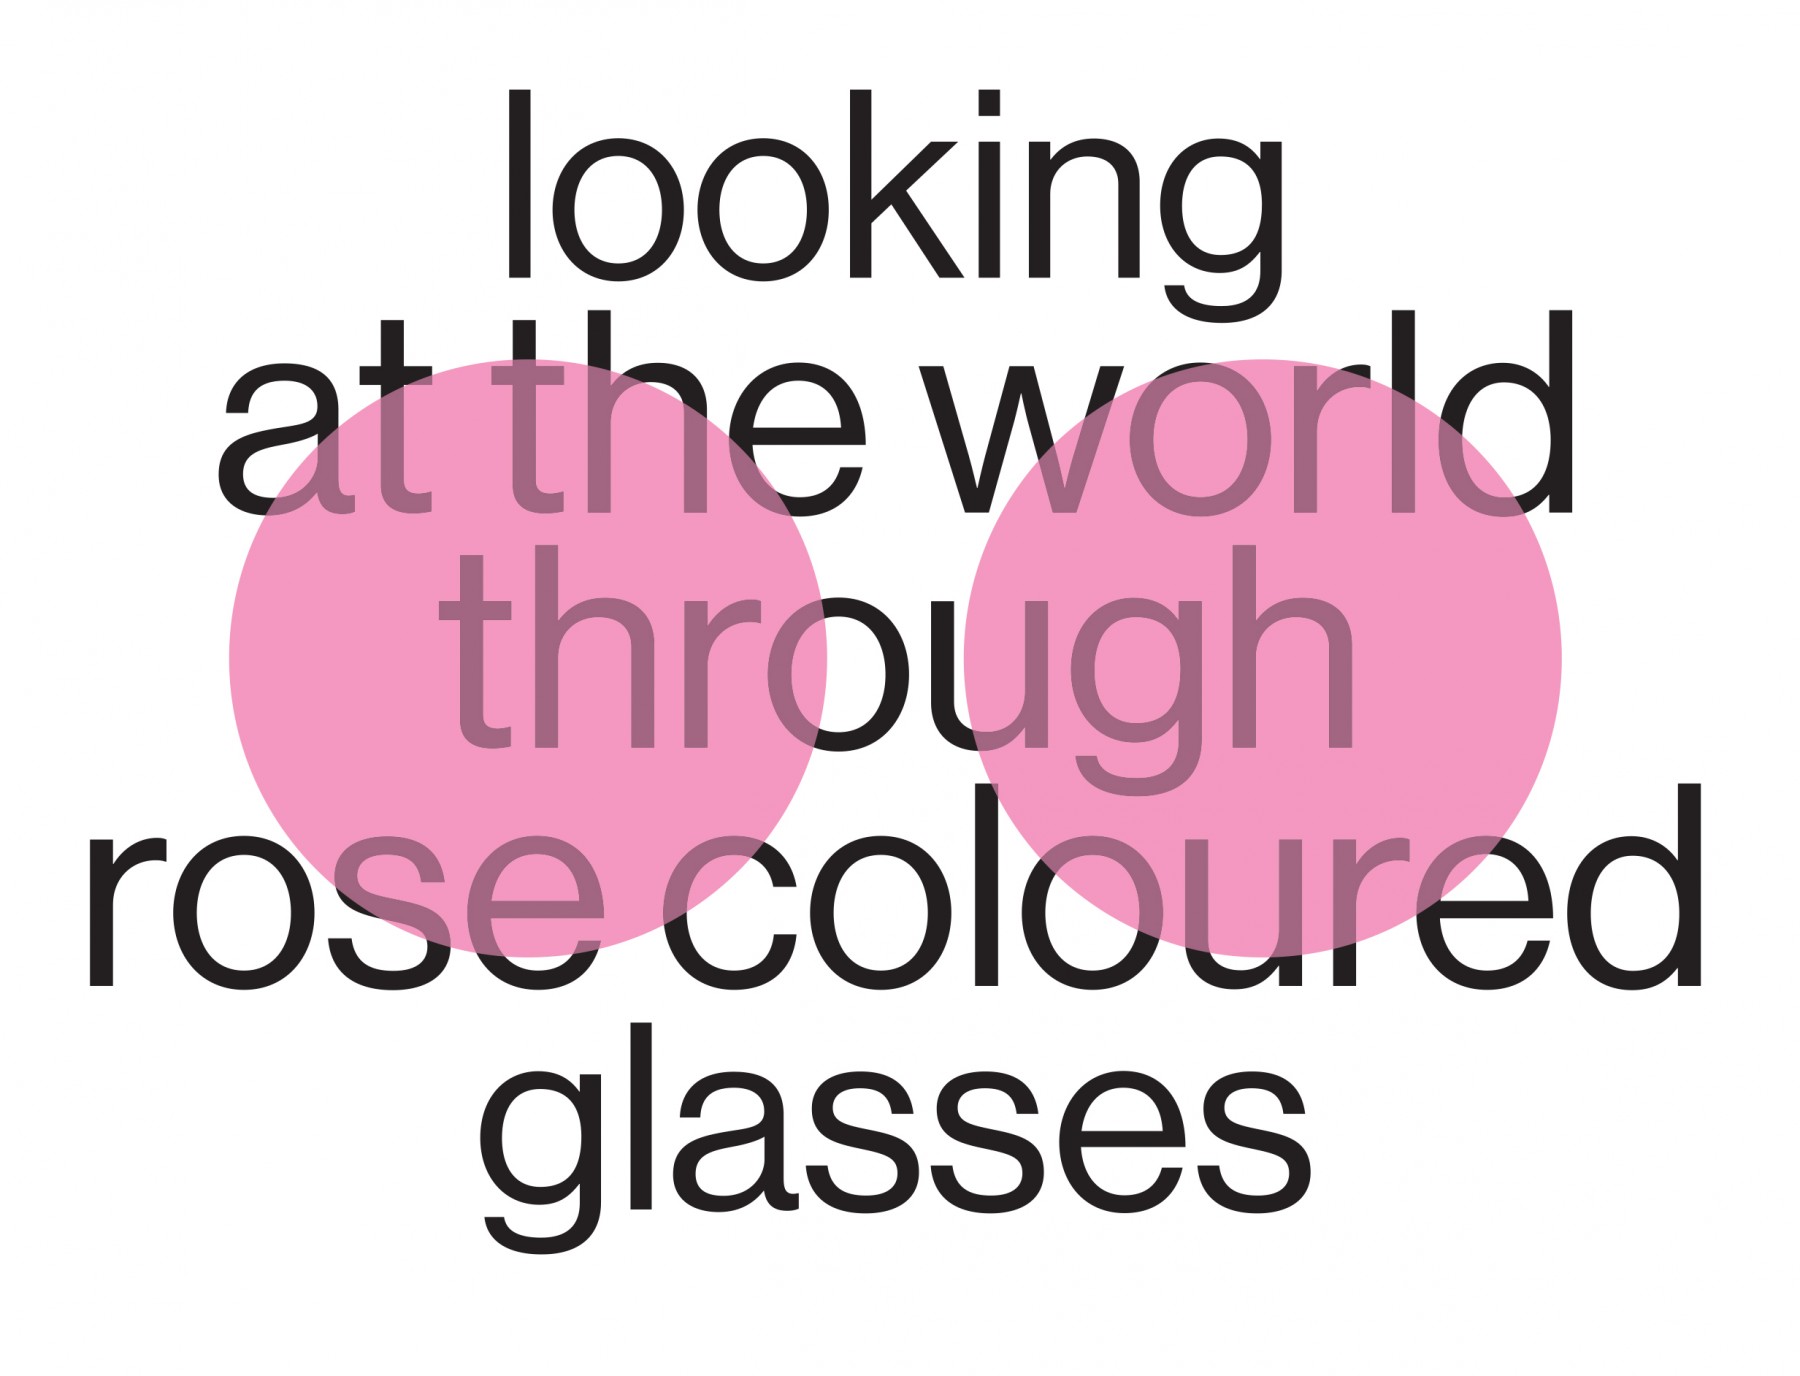 Looking at the world through rose colored glasses